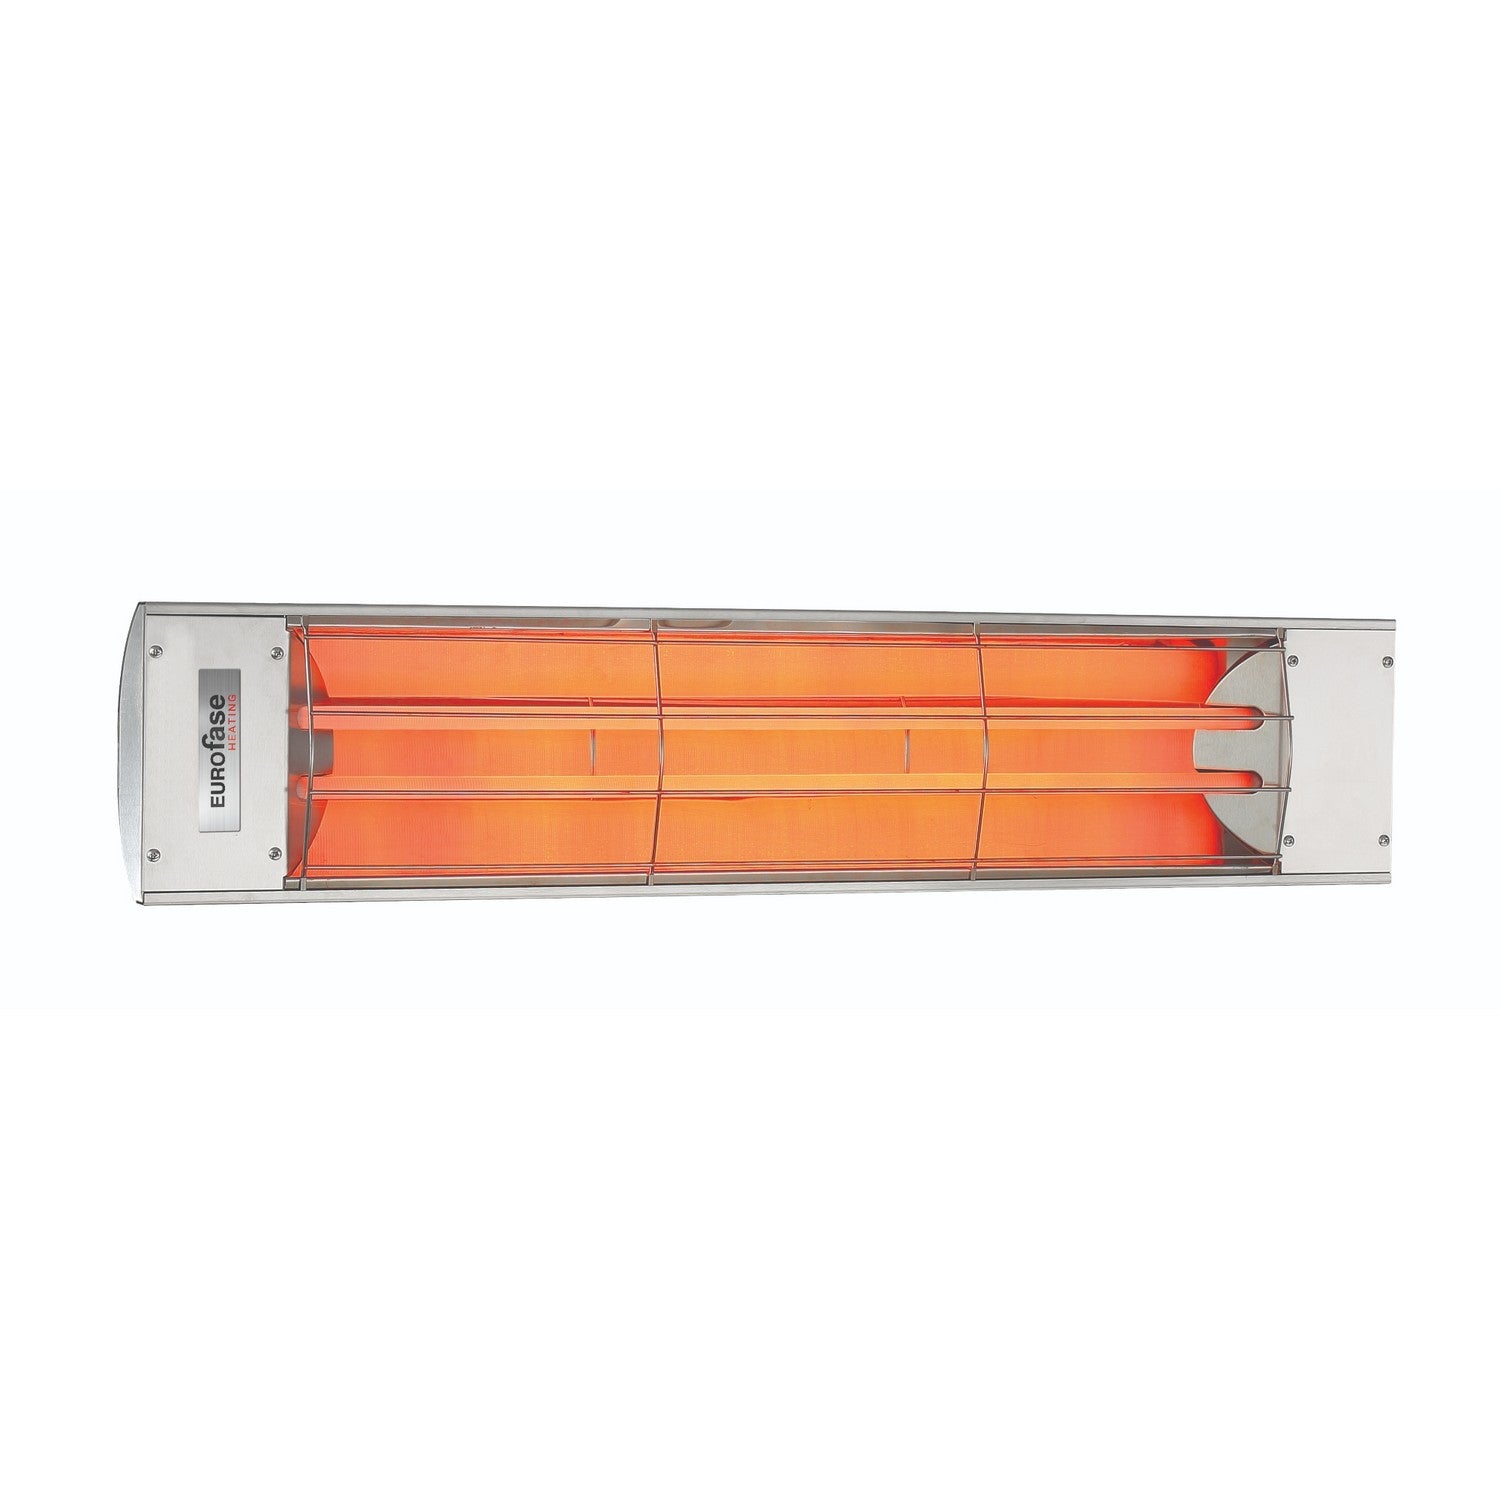 Eurofase - EF50277S - Electric Heater - Stainless Steel